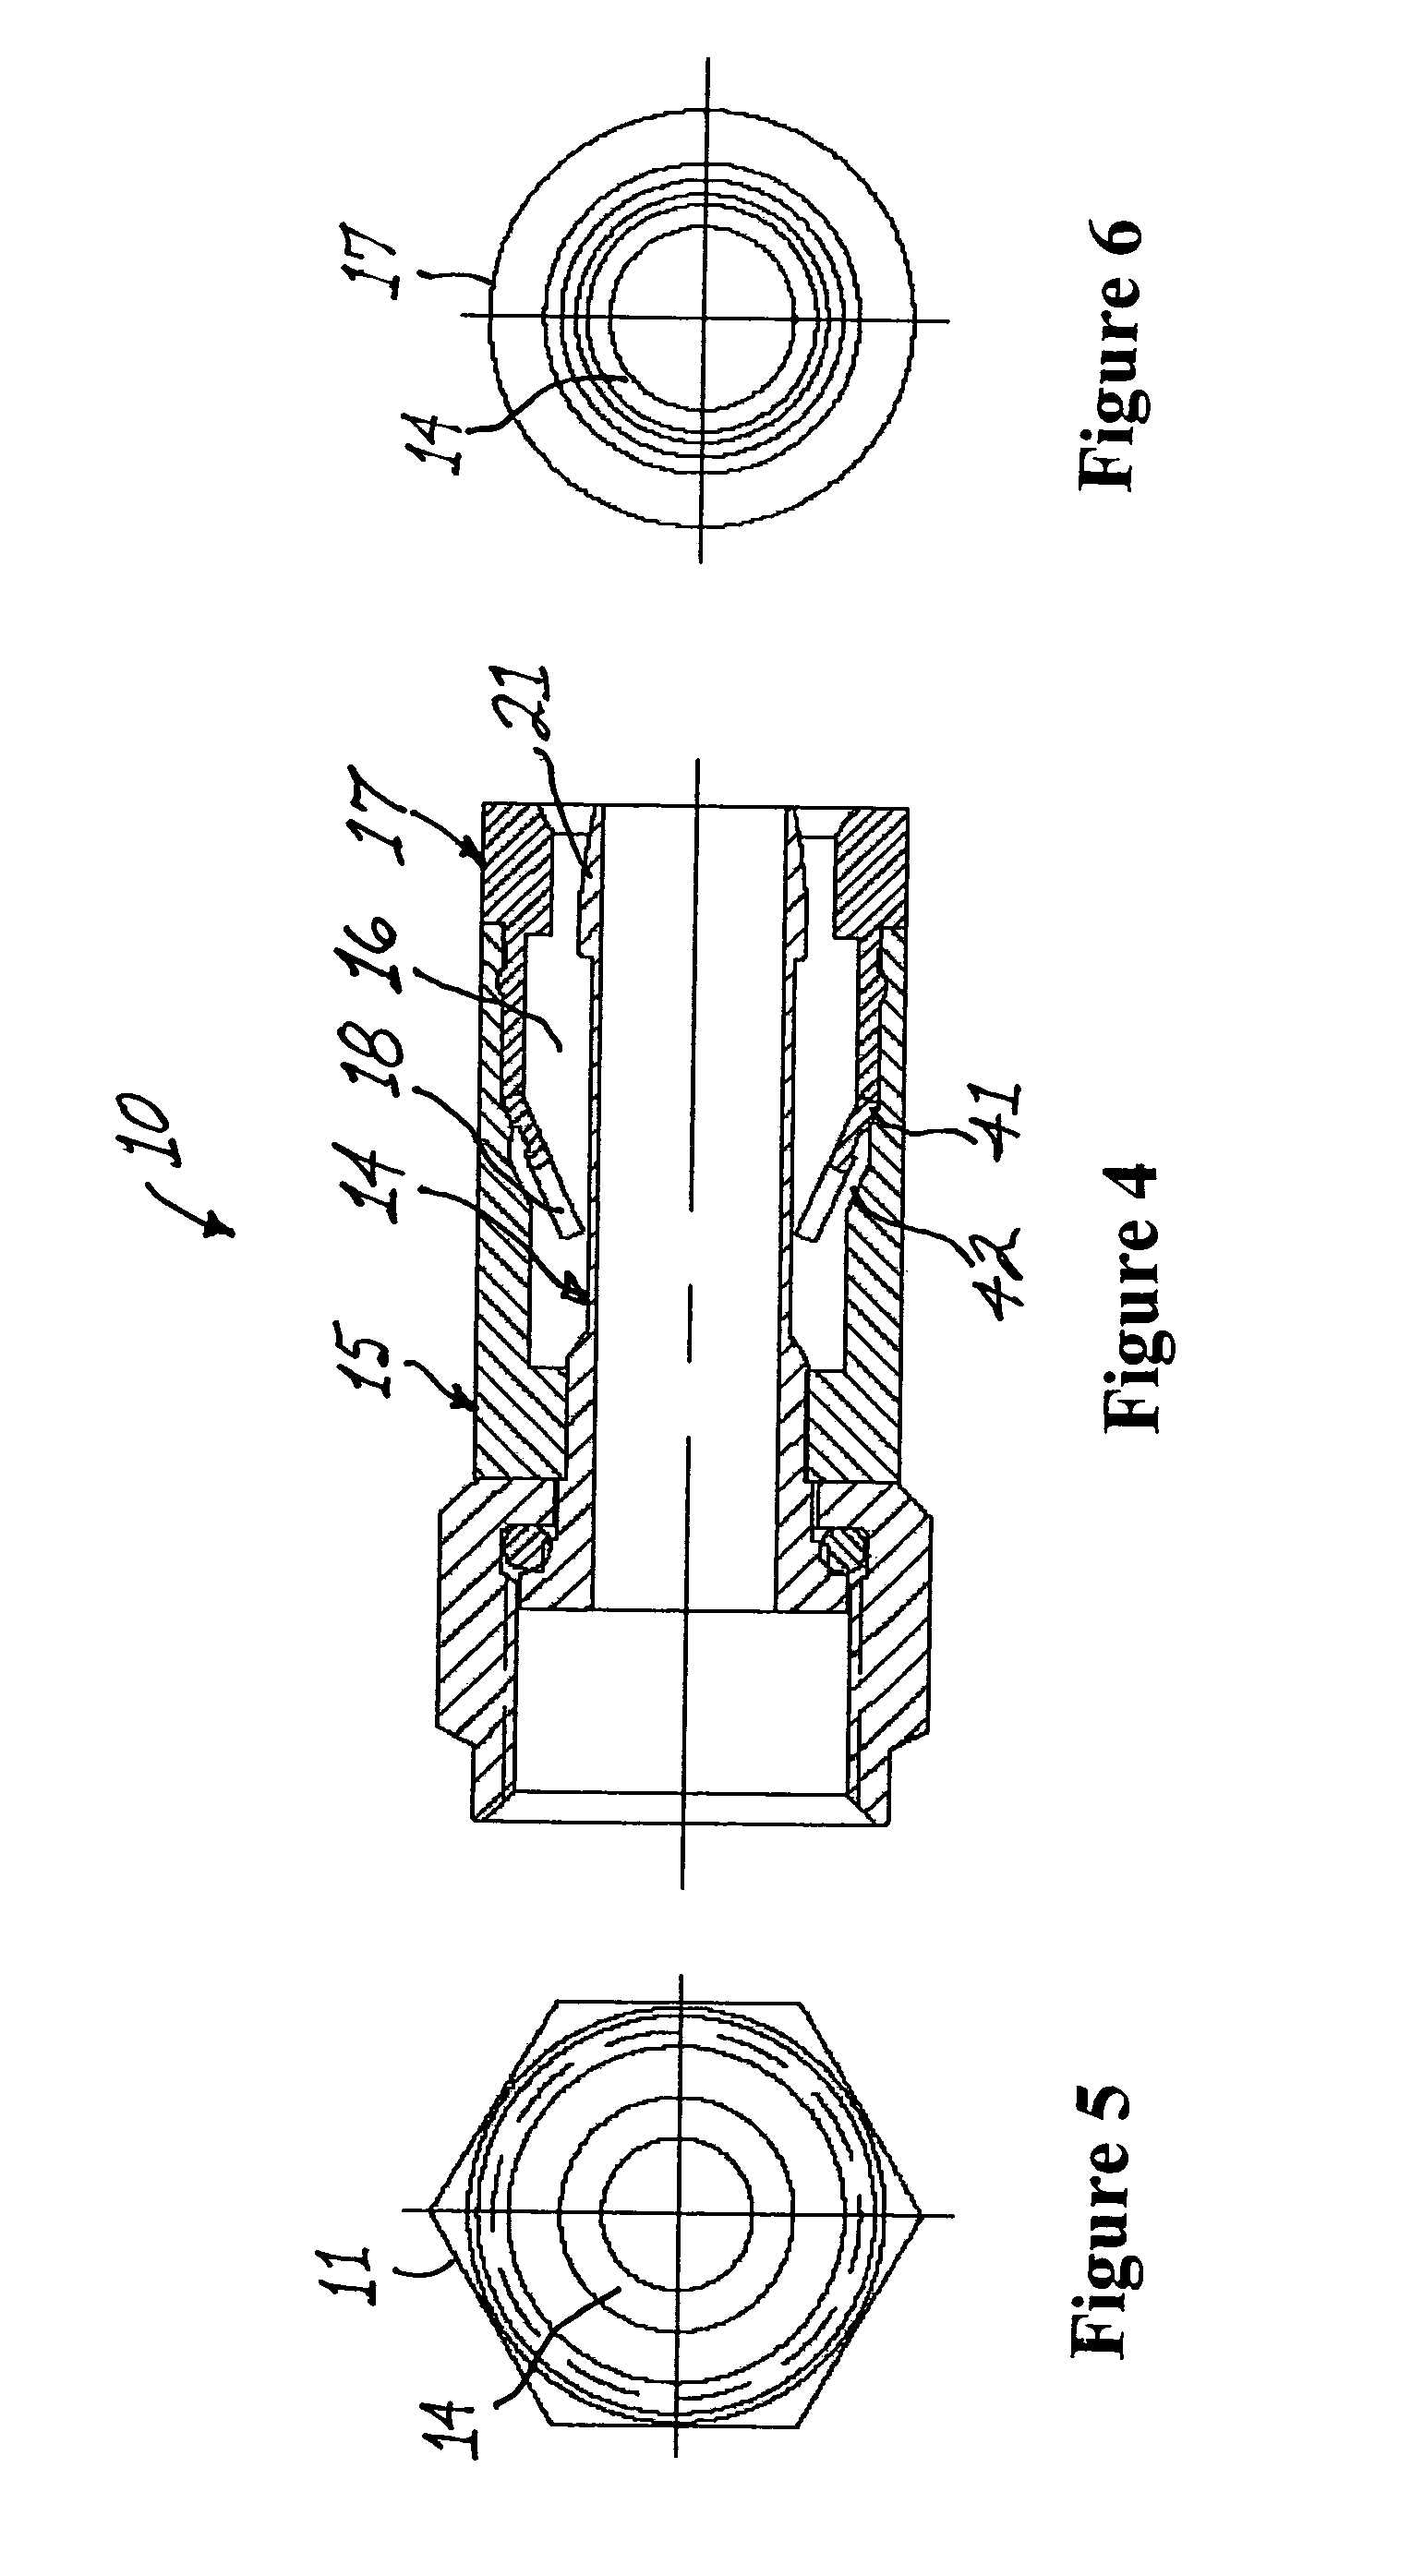 Coaxial cable connector with deformable compression sleeve